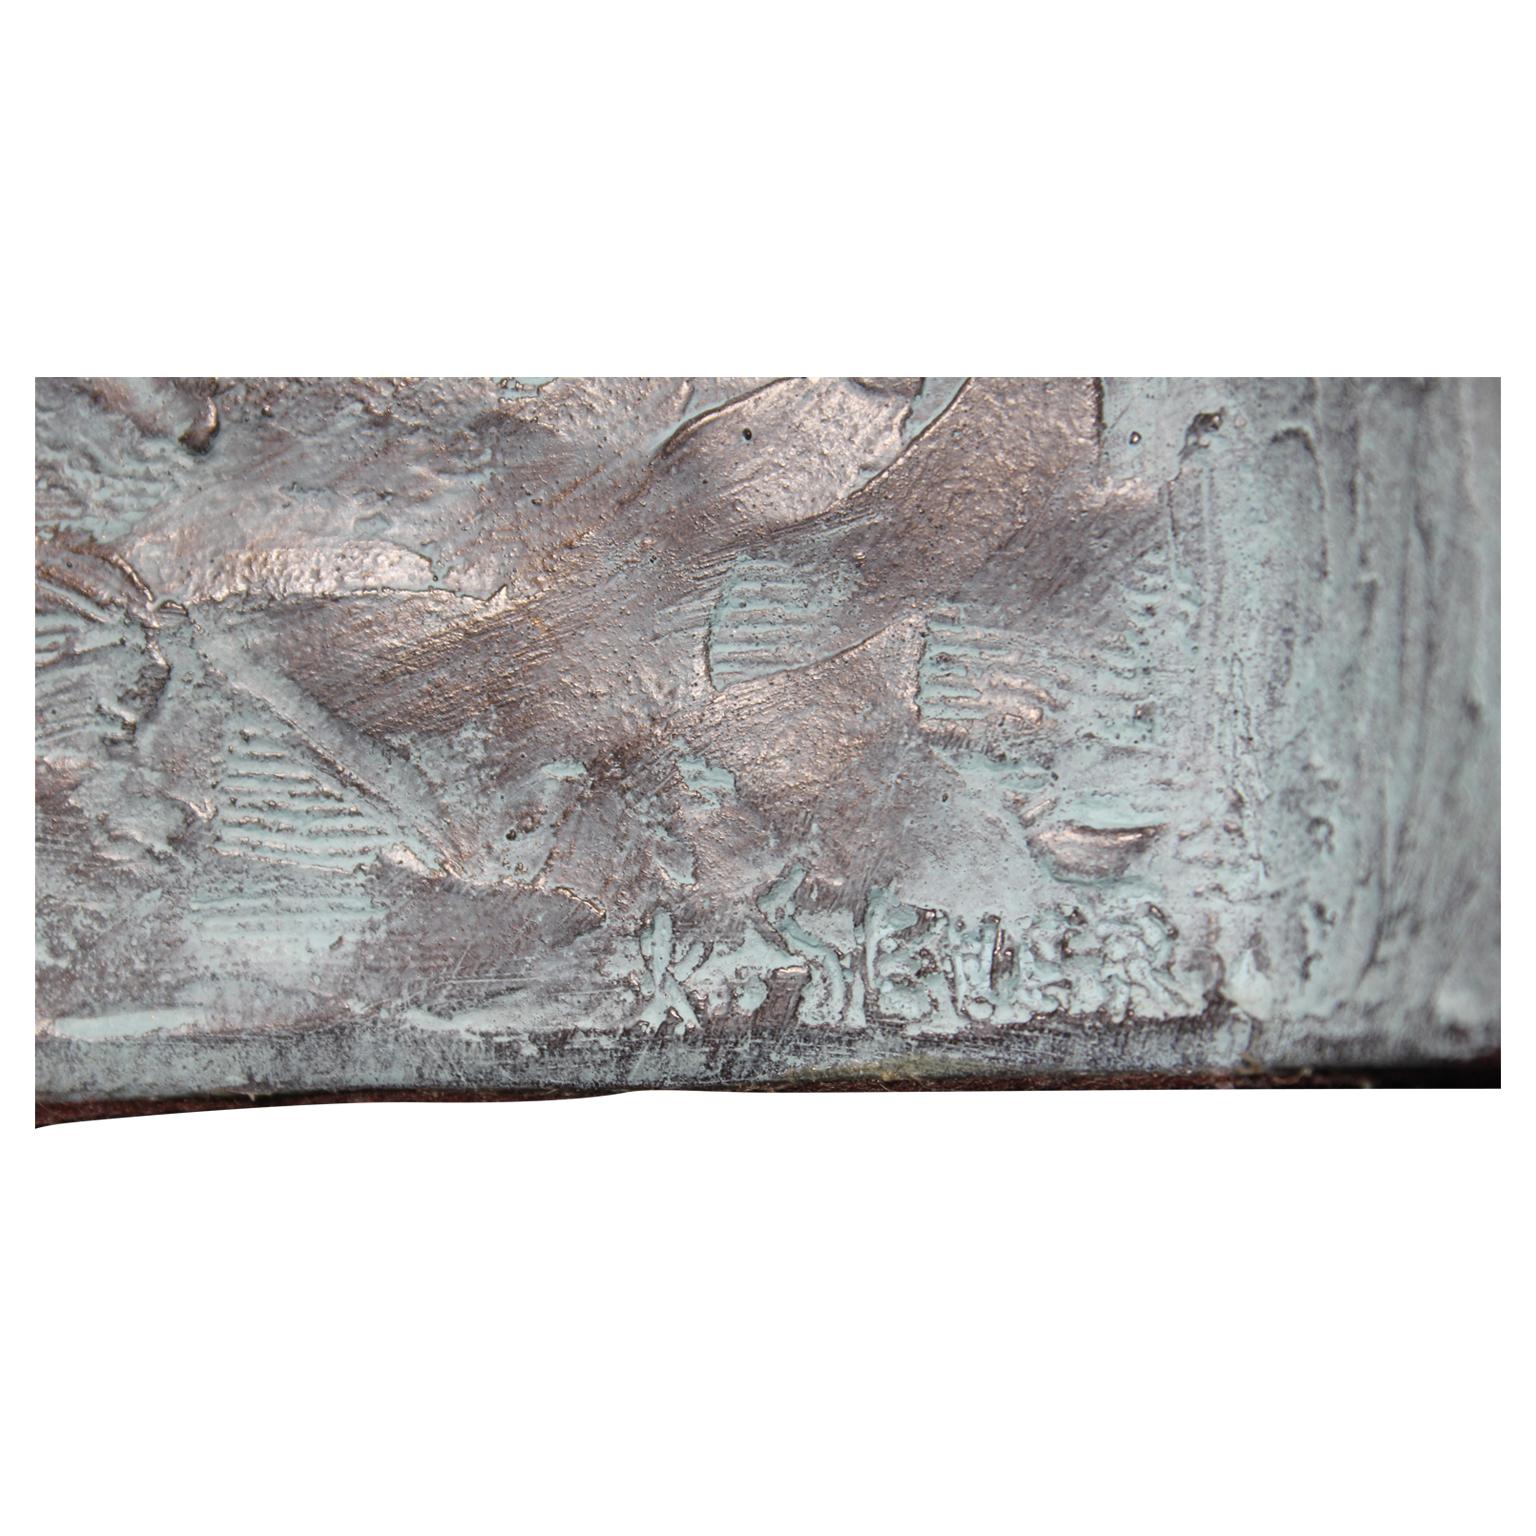 Two girls seated on either side of the bench looking at each other. The bronze is signed and dated by the artist K. Sevar. The bronze was produced by Austin Productions.